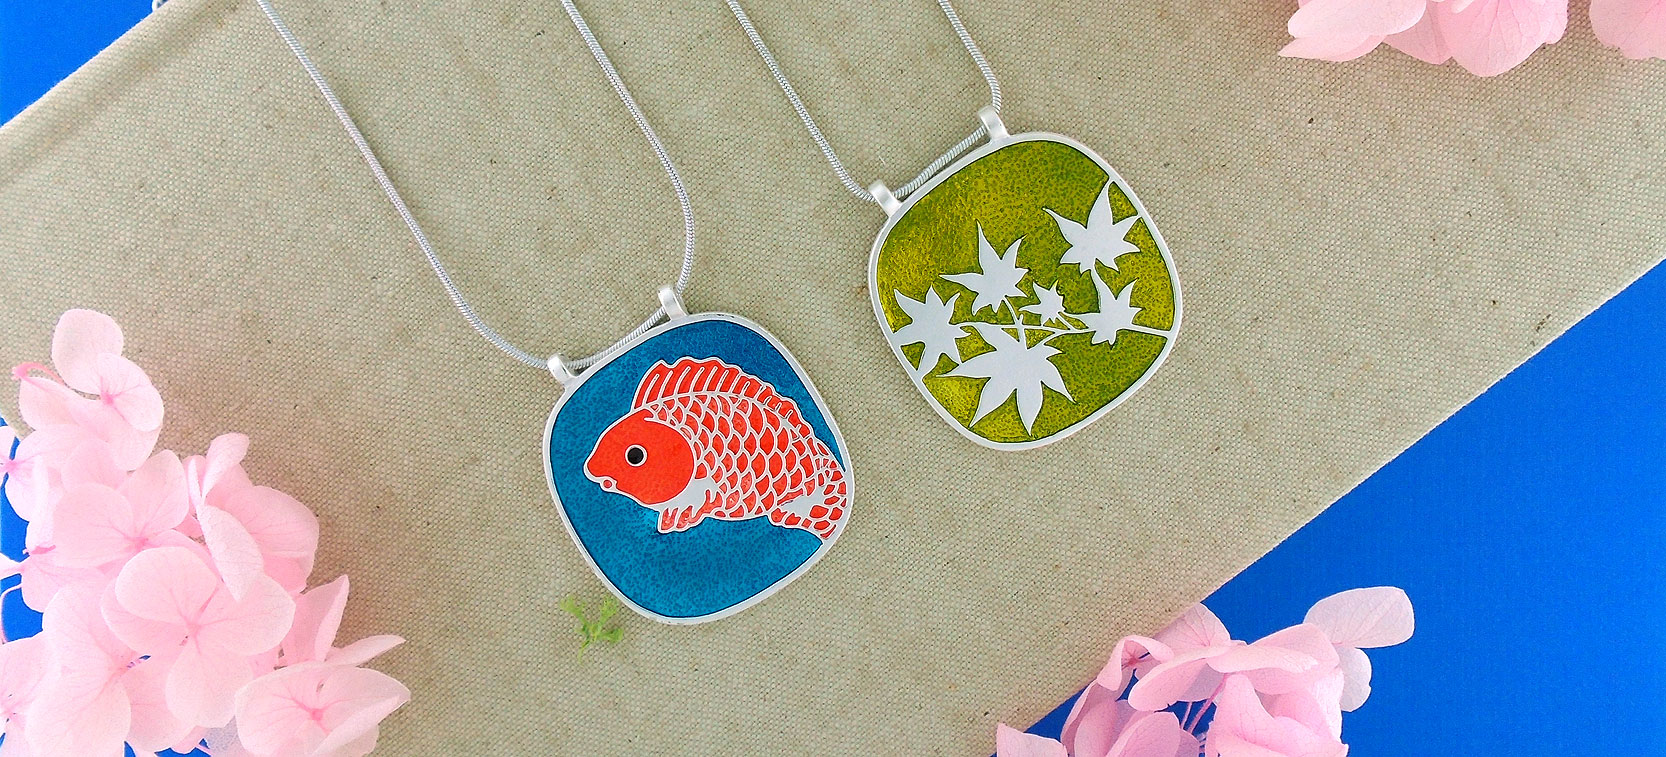 LAVISHY design and wholesale good luck/lucky fish themed vegan accessories and gfits to gift shops, boutiques and book stores in Canada, USA and worldwide.